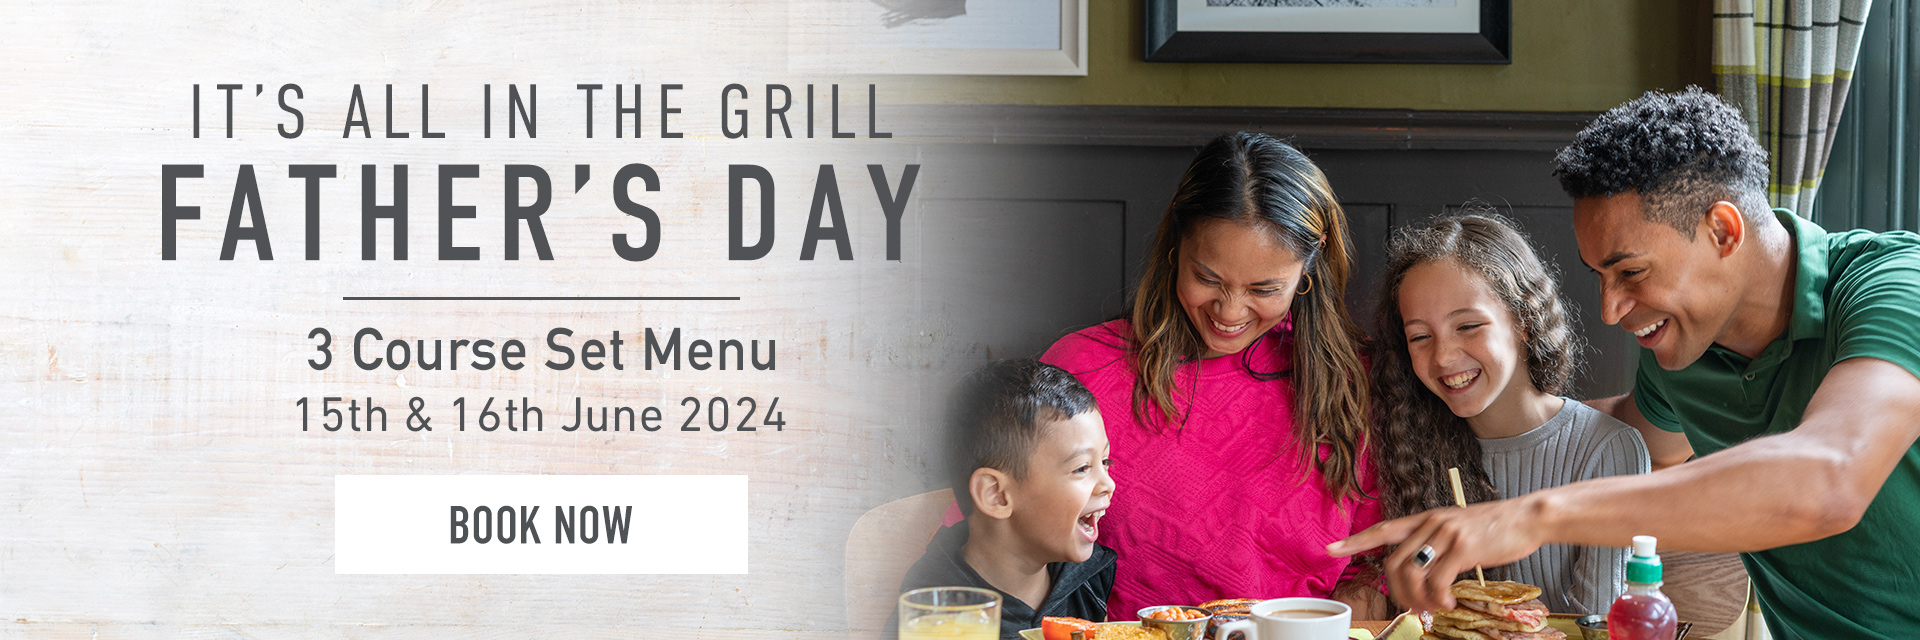 Father’s Day at Harvester George Stephenson